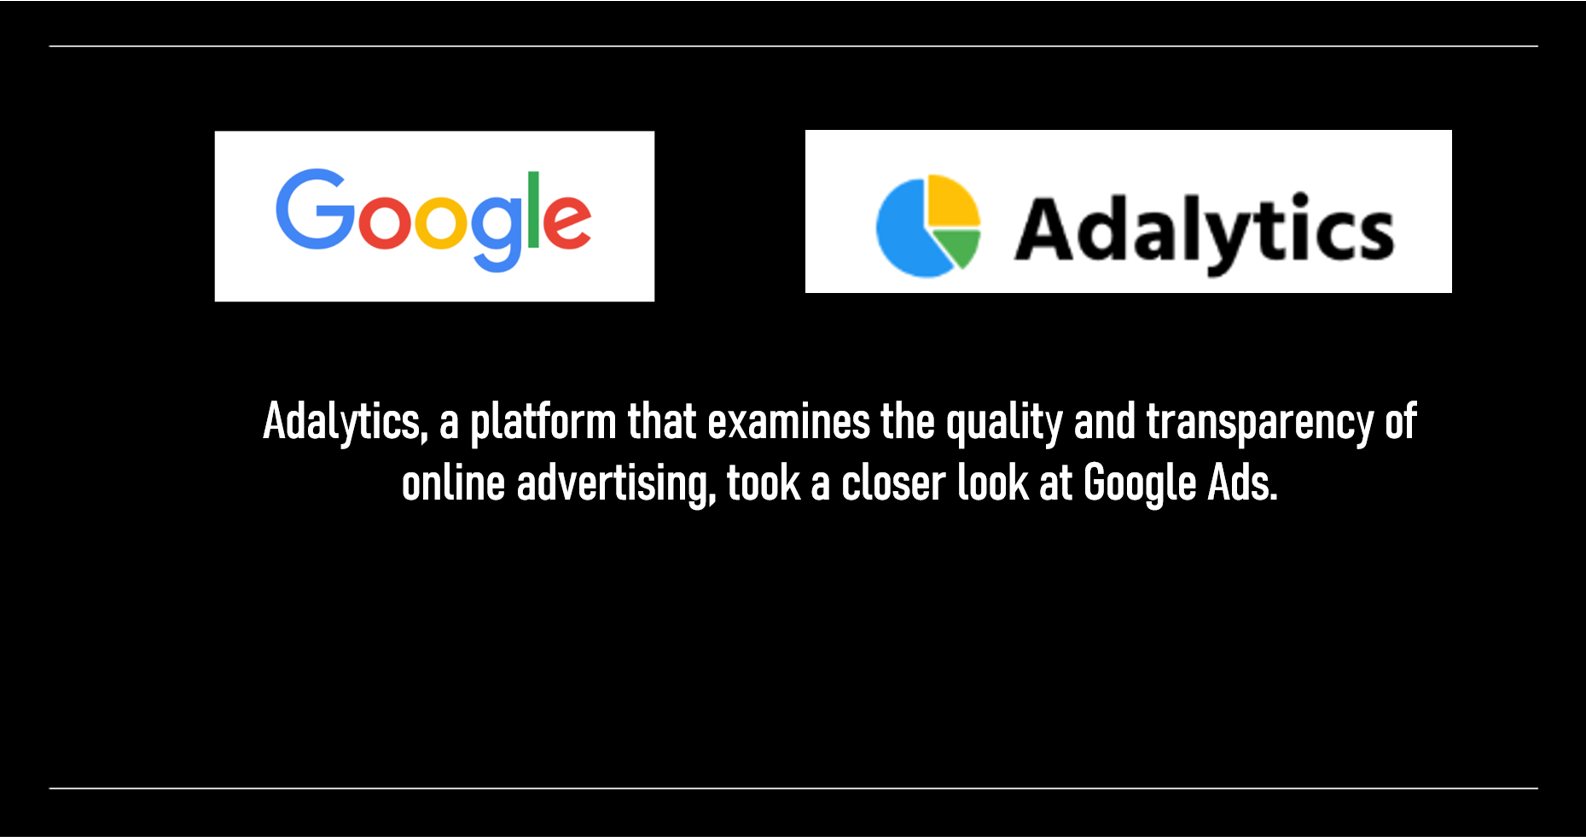 Adalytics, a platform that examines the quality and transparency of online advertising, took a closer look at Google Ads. Below is a summary of their reports on this topic.